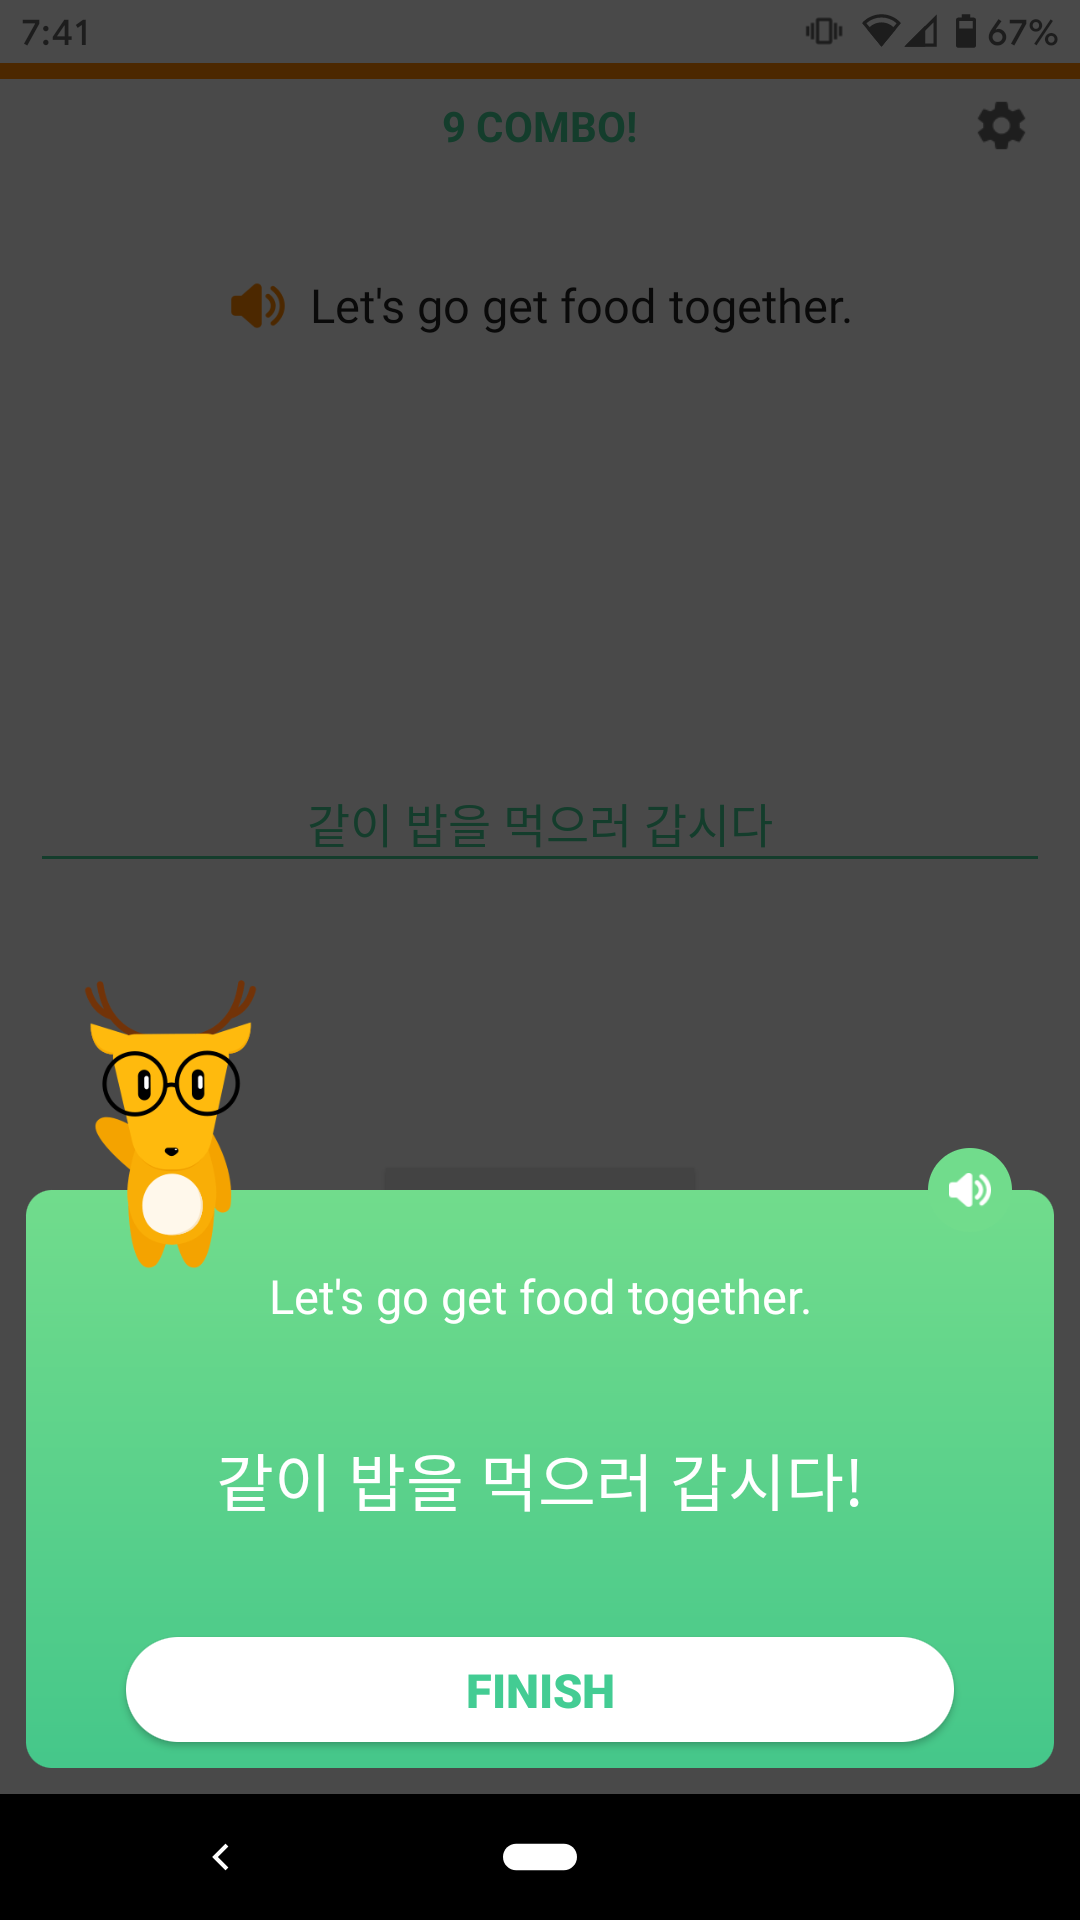 A screenshot of the LingoDeer app showing the successful completion of an exercise. The text says "Let's go get food together" in English and "같이 밥을 먹으러 갑시다" in Korean.